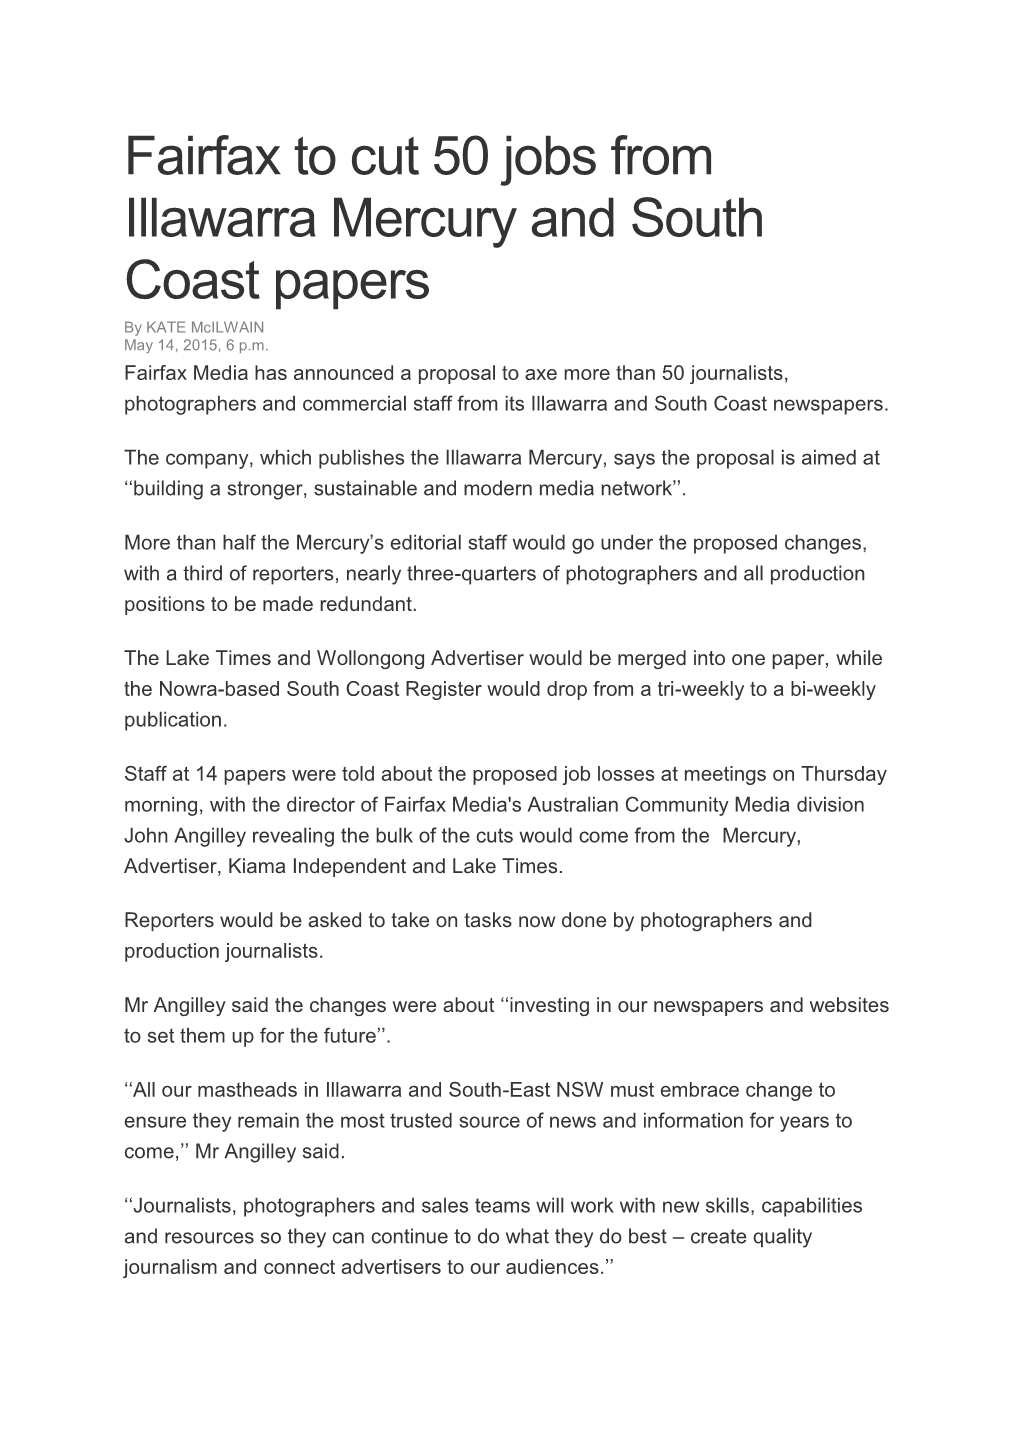 Fairfax to Cut 50 Jobs from Illawarra Mercury and South Coast Papers by KATE Mcilwain May 14, 2015, 6 P.M